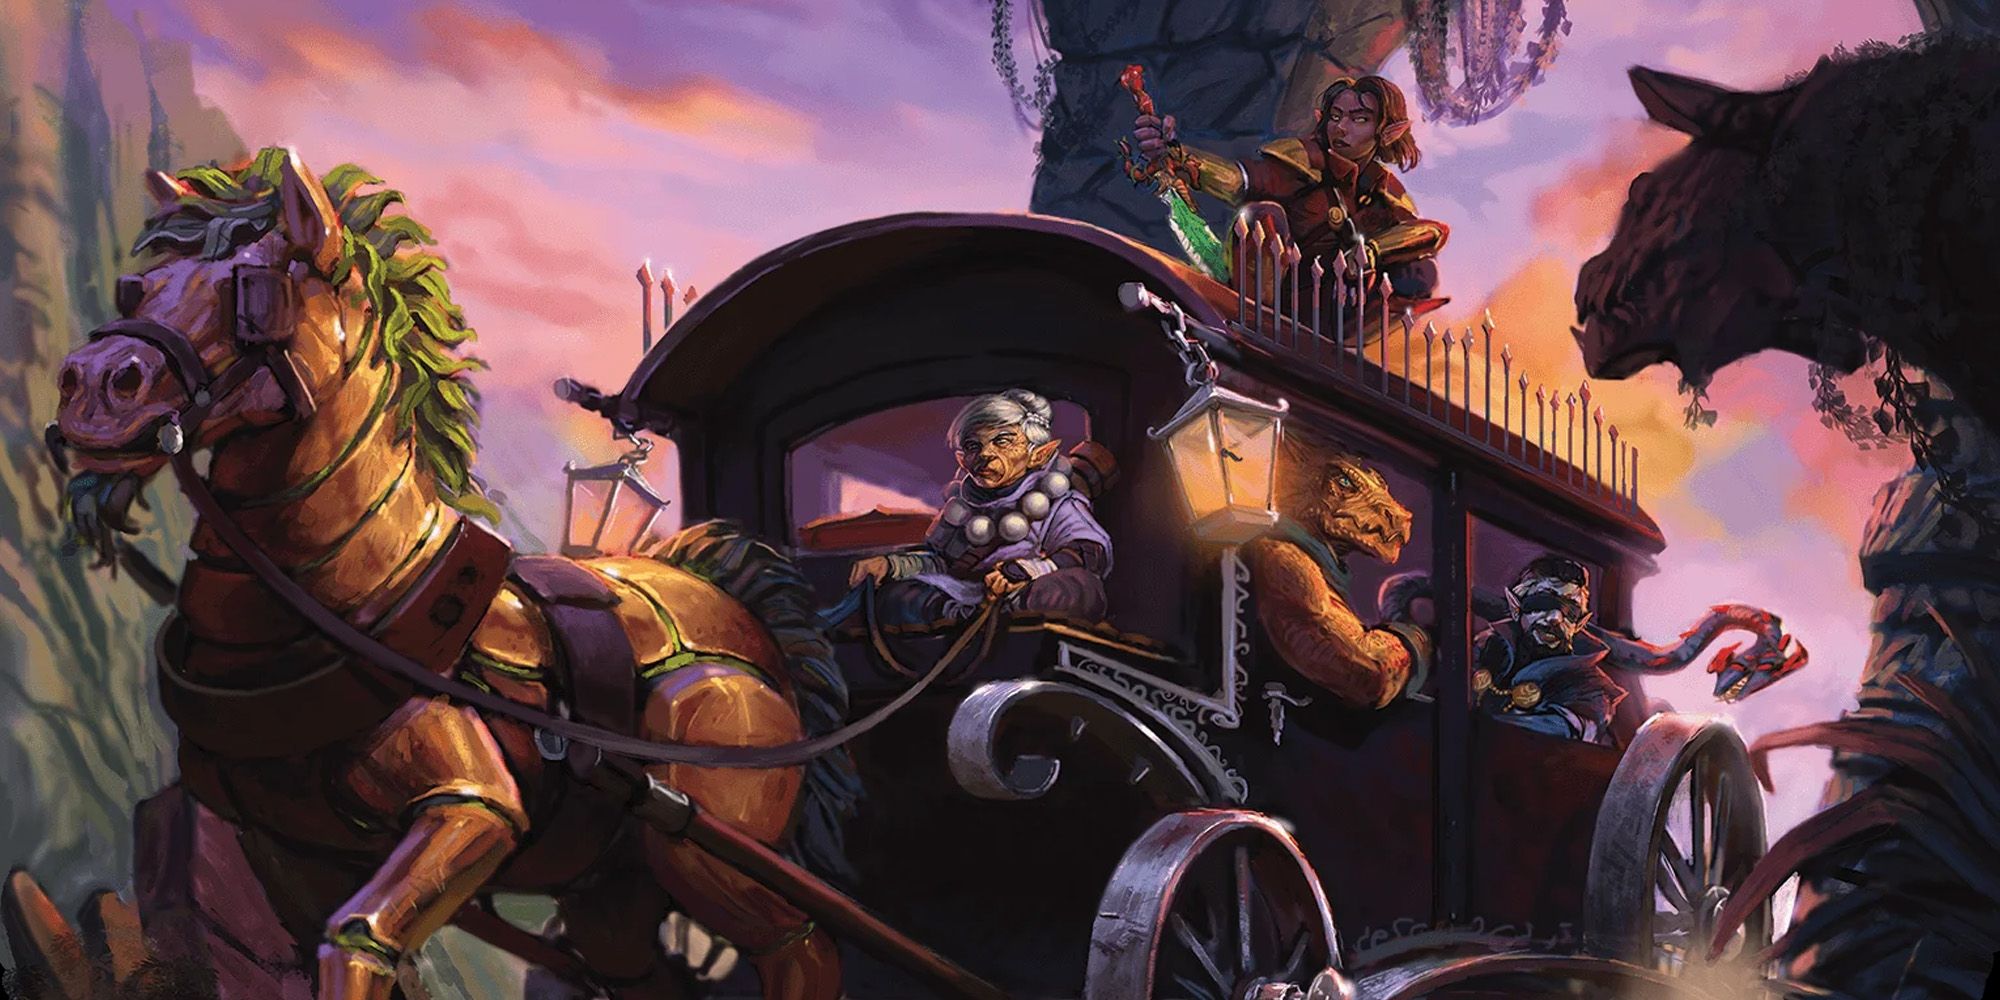 Carriage of adventurers